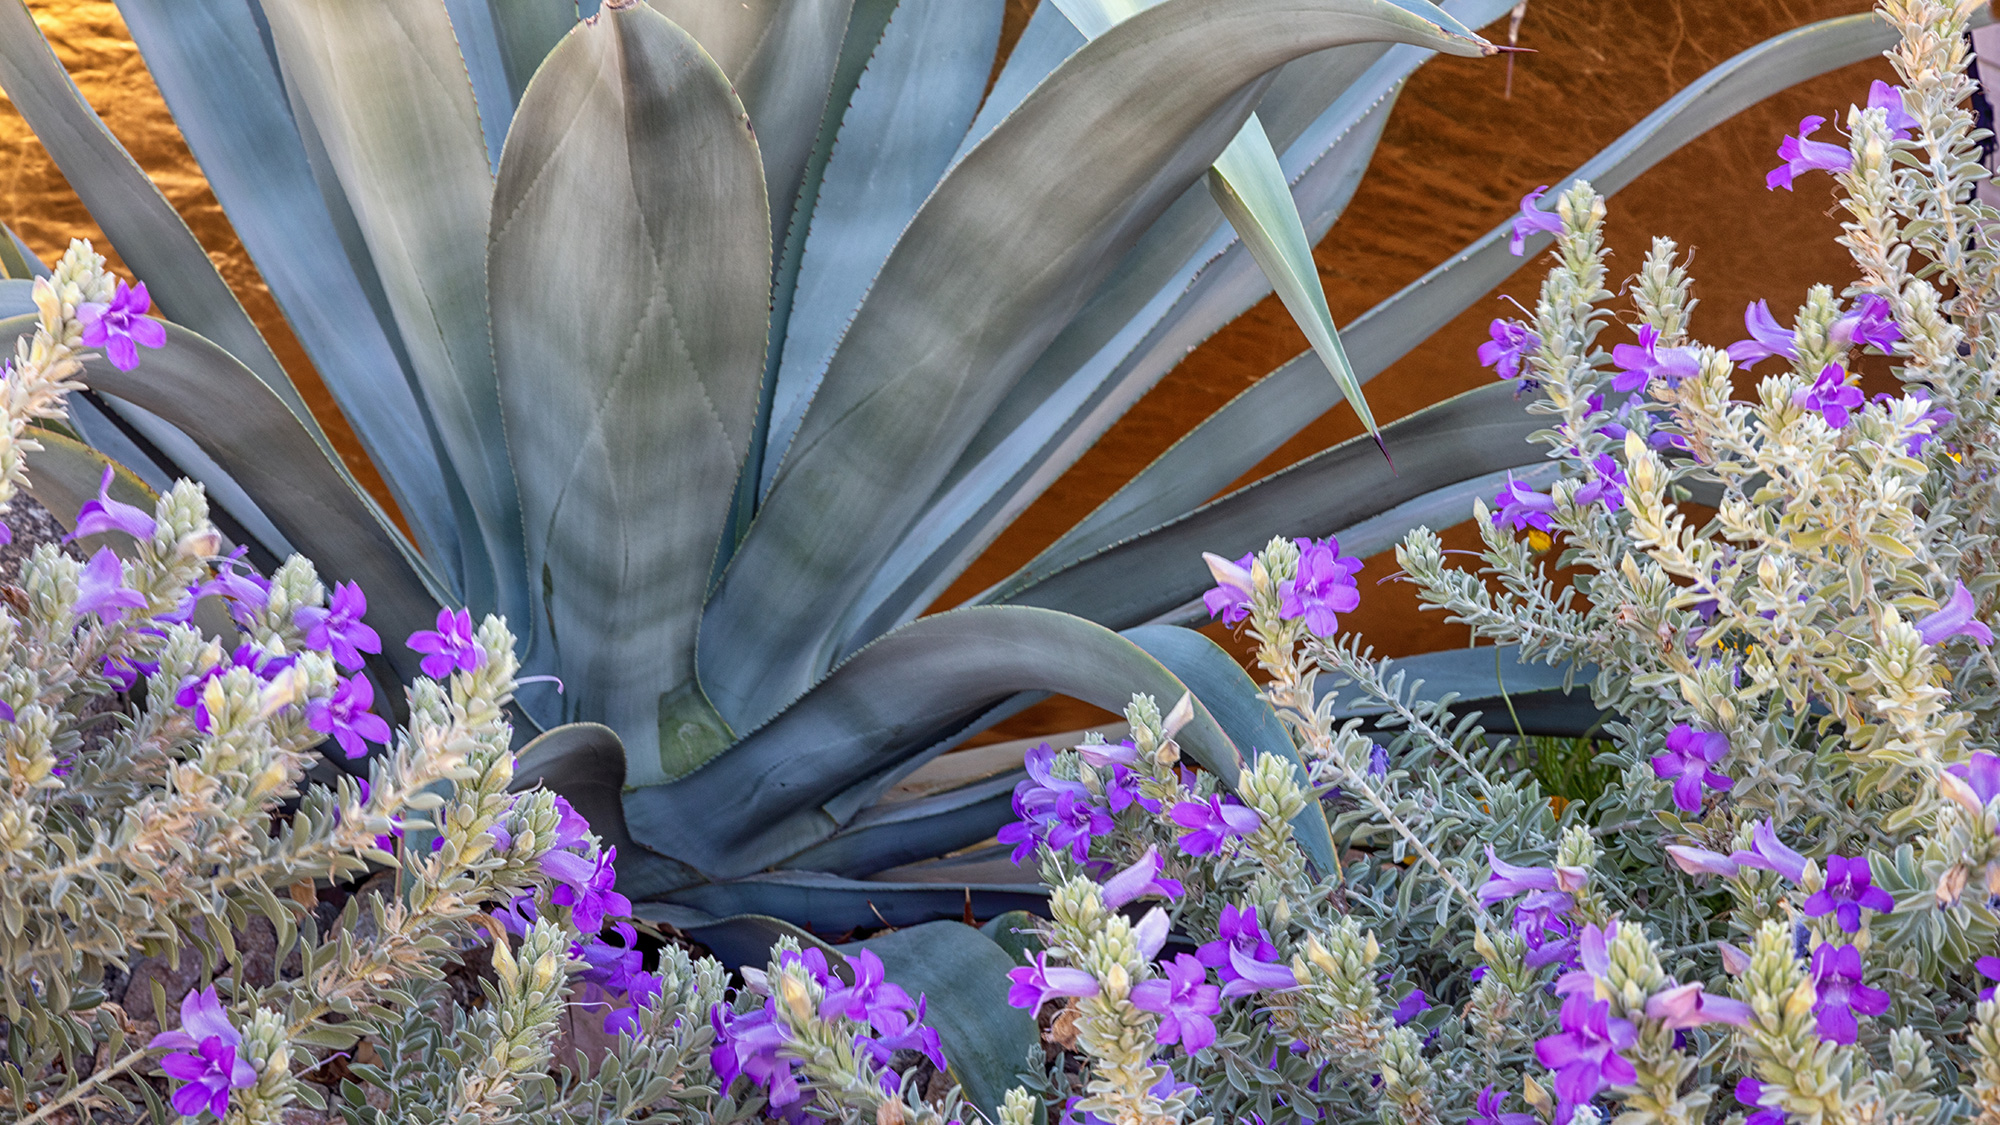 Agave with purple flowers next to it